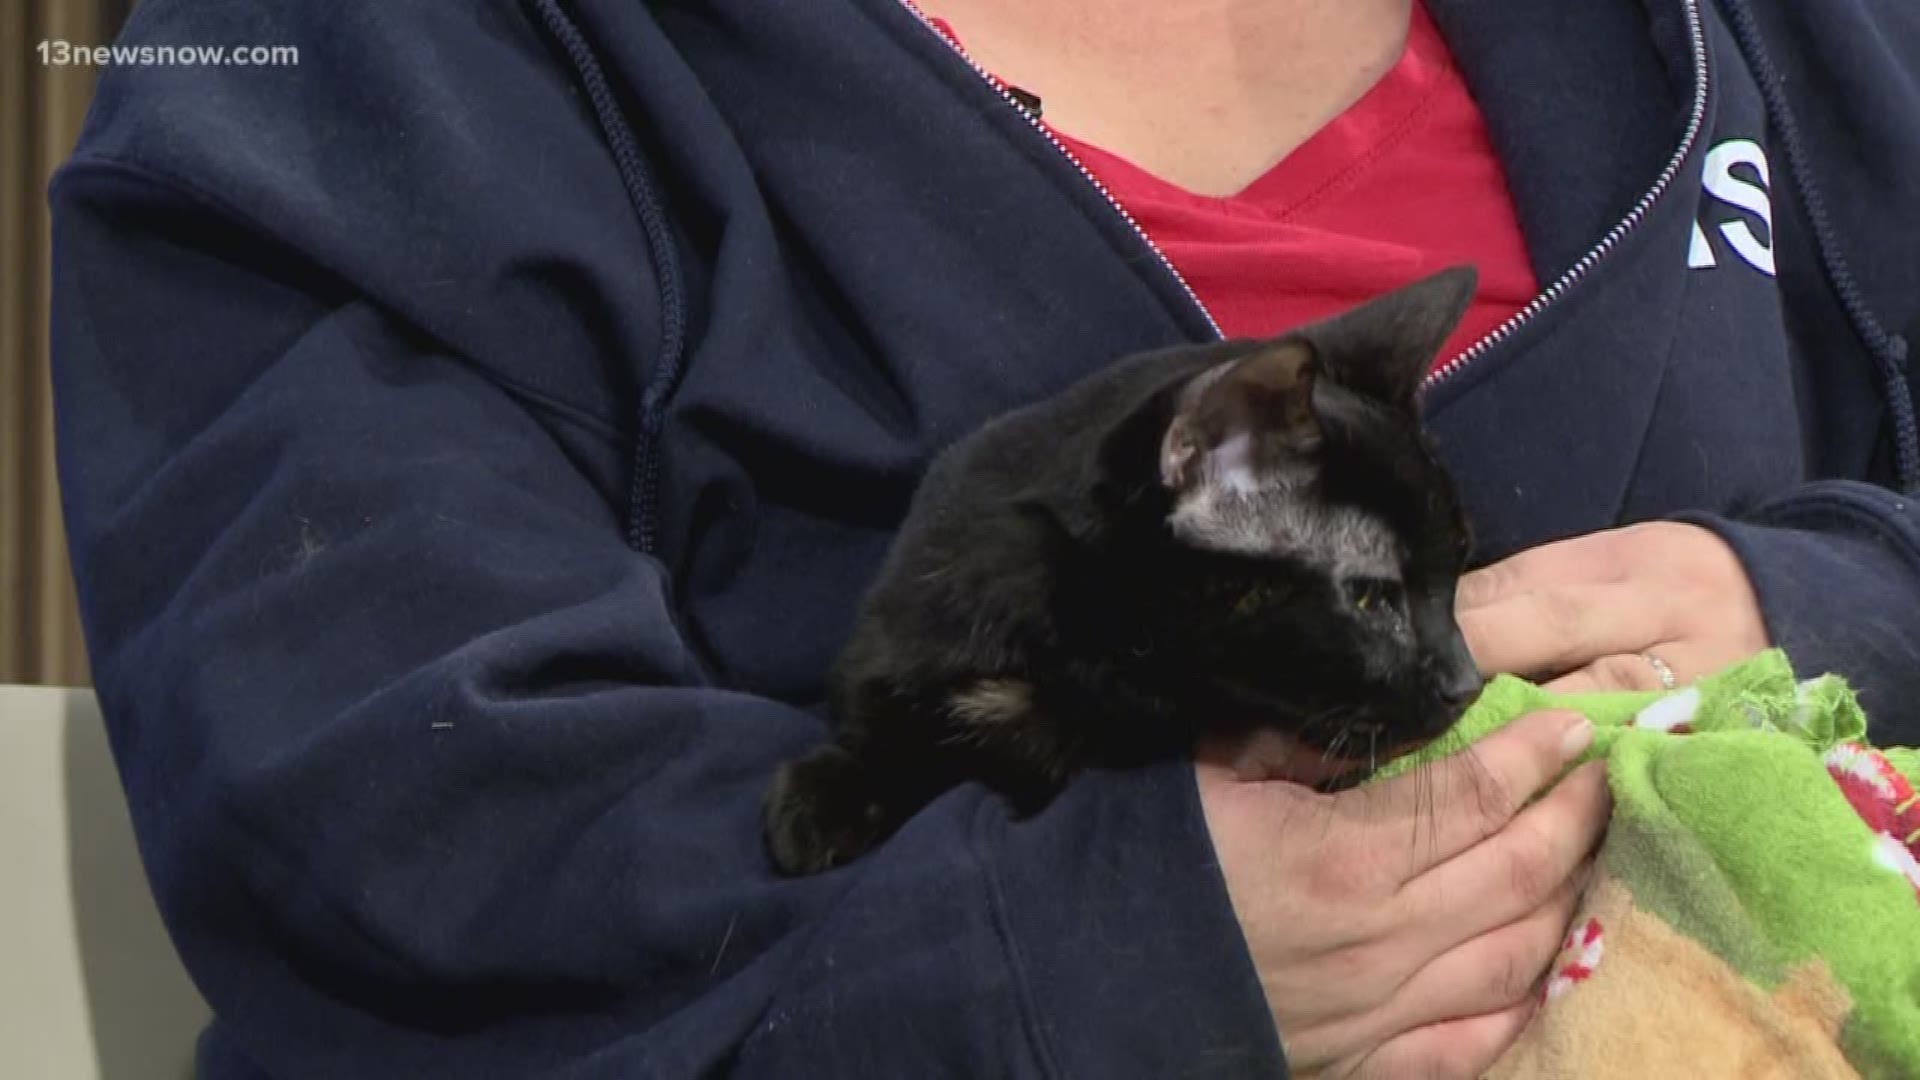 The Portsmouth Humane Society visited the 13News Now studio to find a home for Arabella.